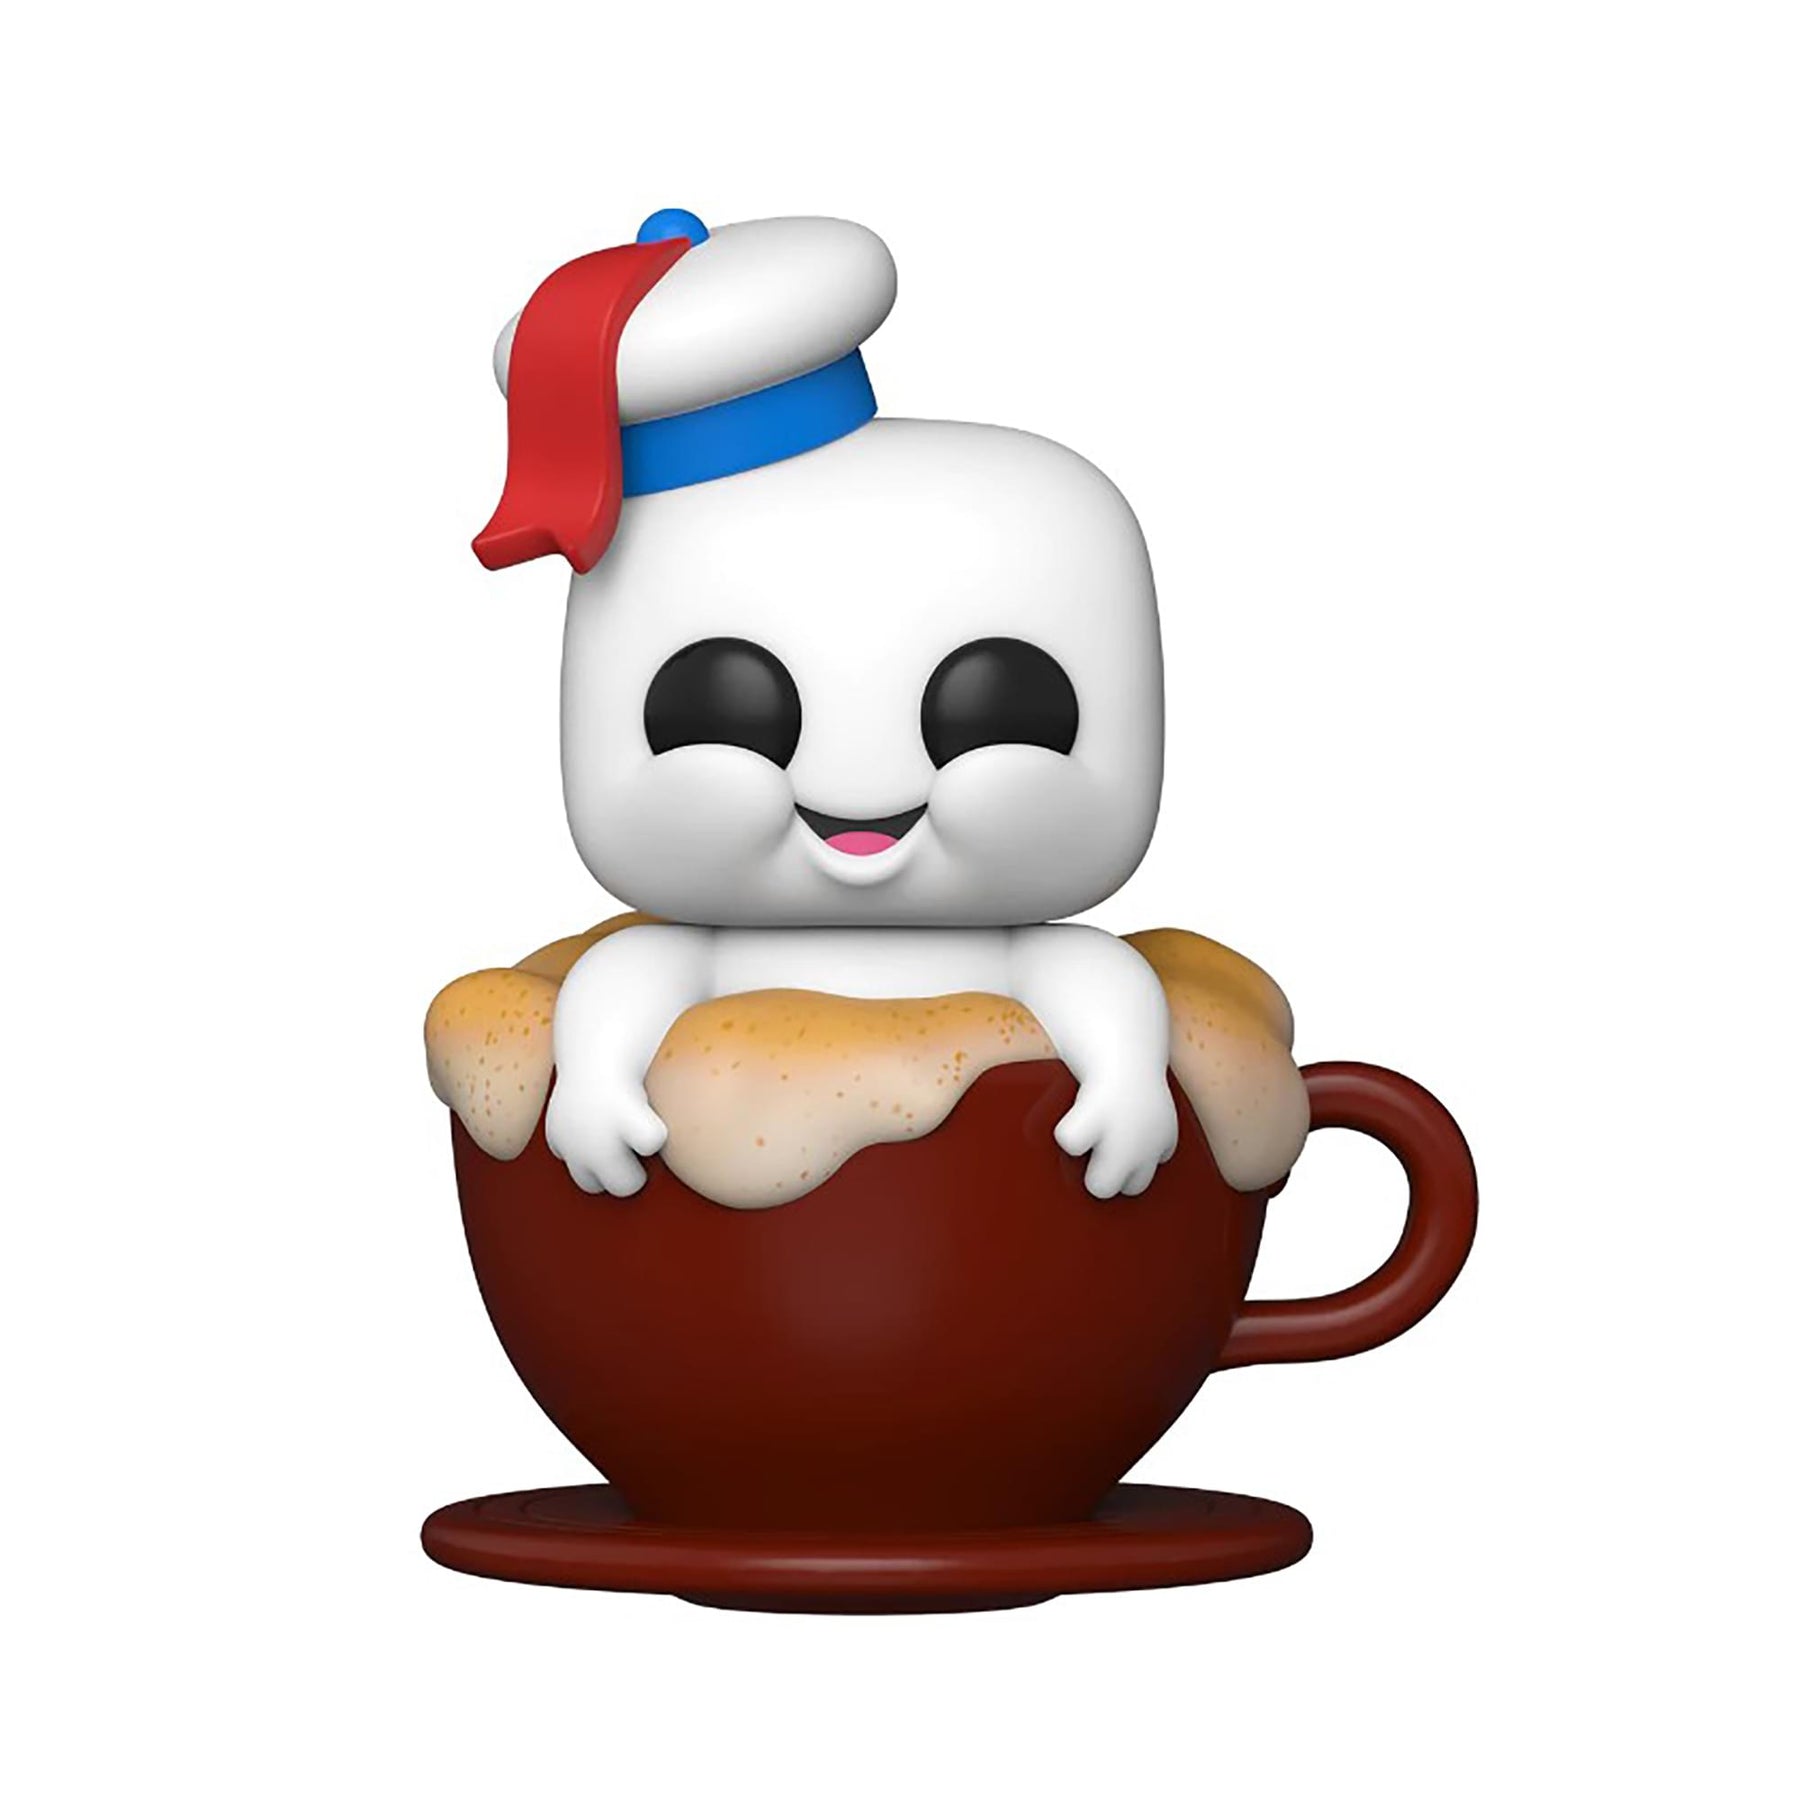 Ghostbusters Afterlife Funko POP Vinyl Figure | Mini Puft in Cappuccino Cup